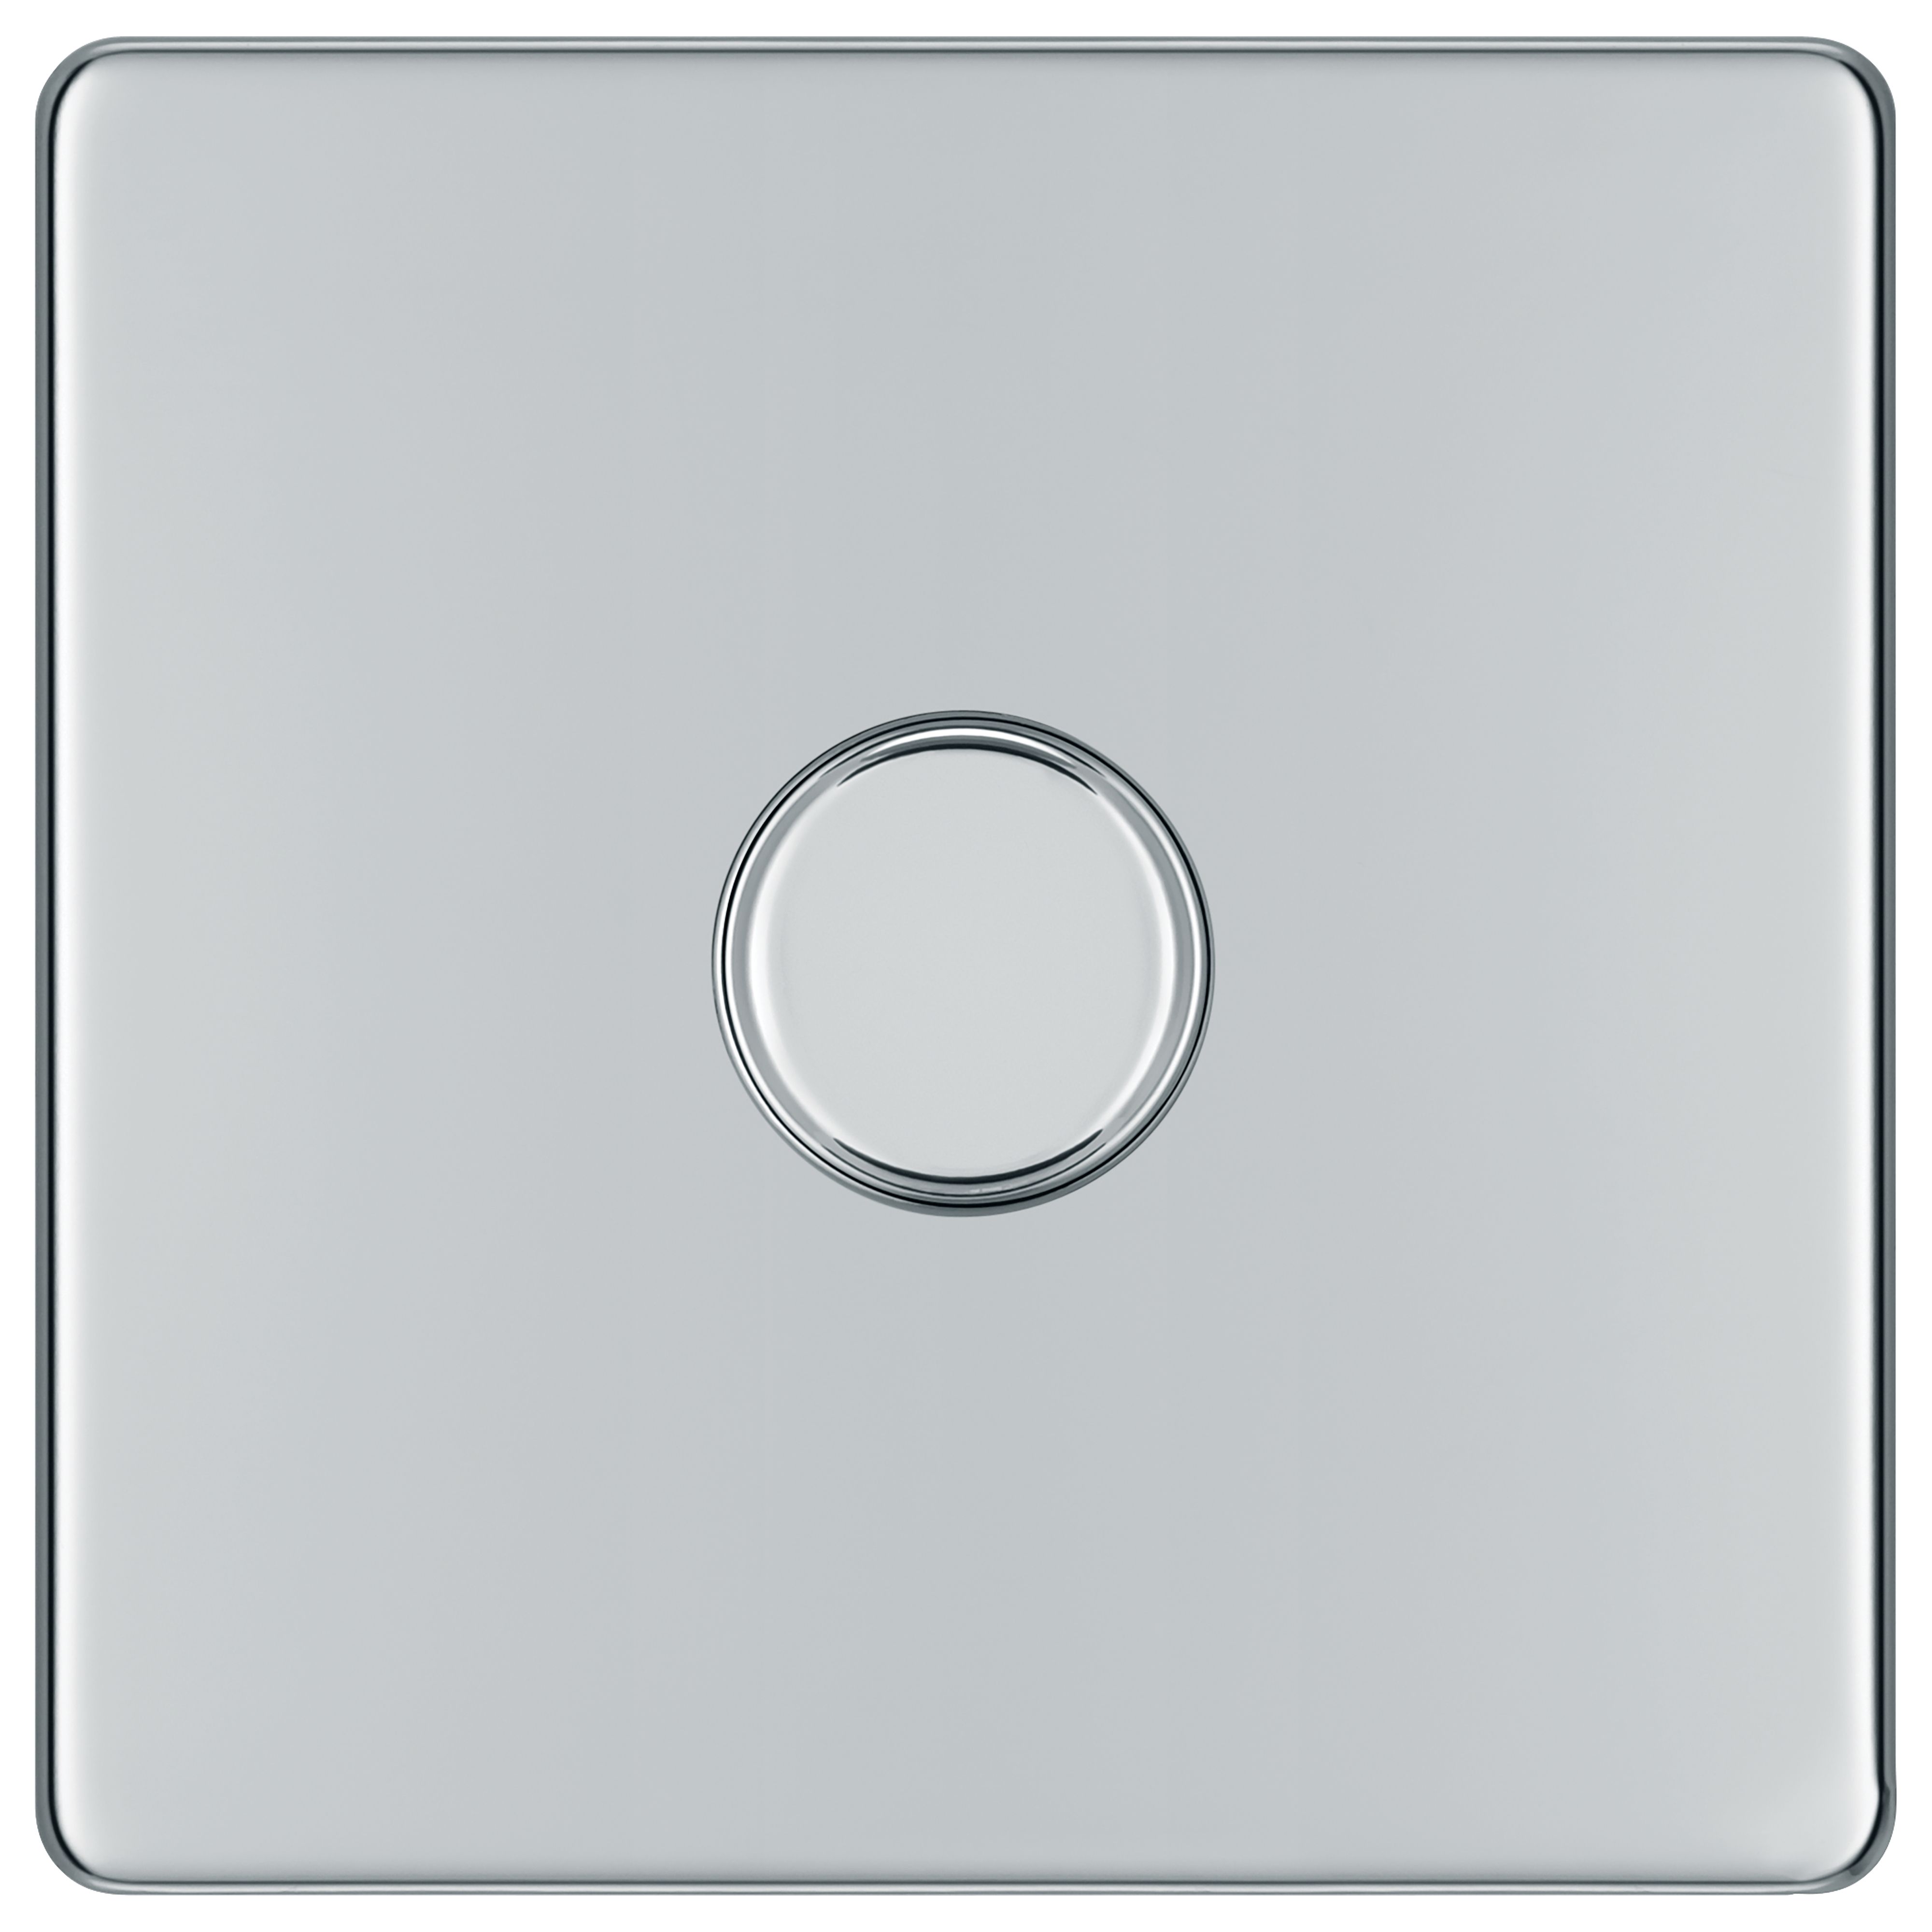 Image of BG 400W Screwless Flat Plate Single Dimmer Switch, 2-Way Push On/Off - Polished Chrome